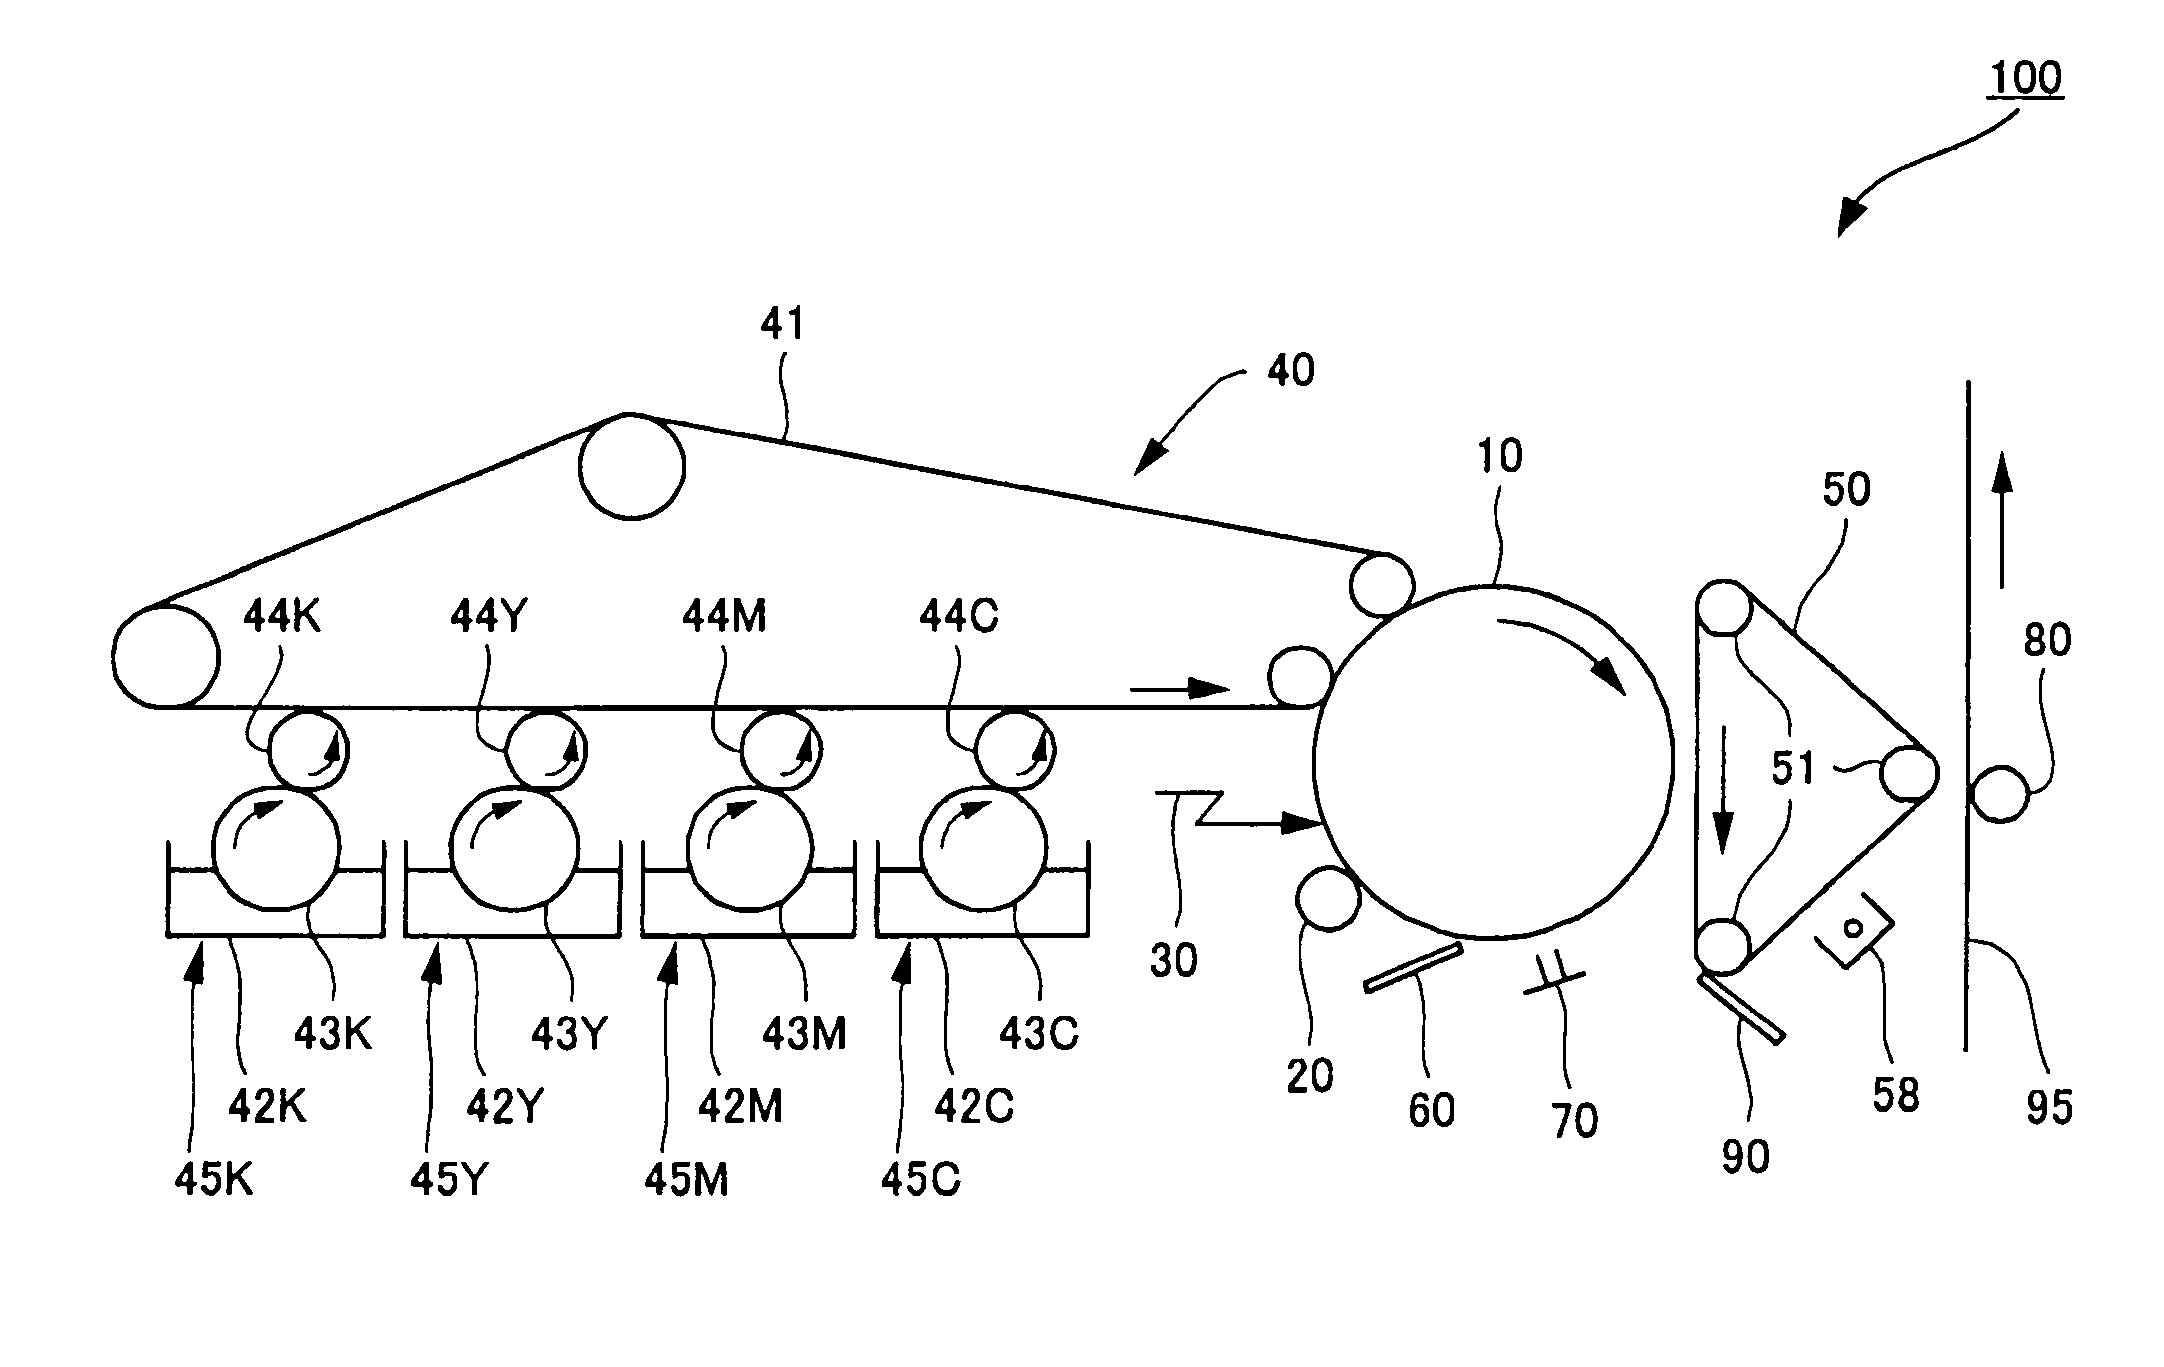 Toner for developing latent electrostatic image, two-component developer, image forming method and image forming apparatus